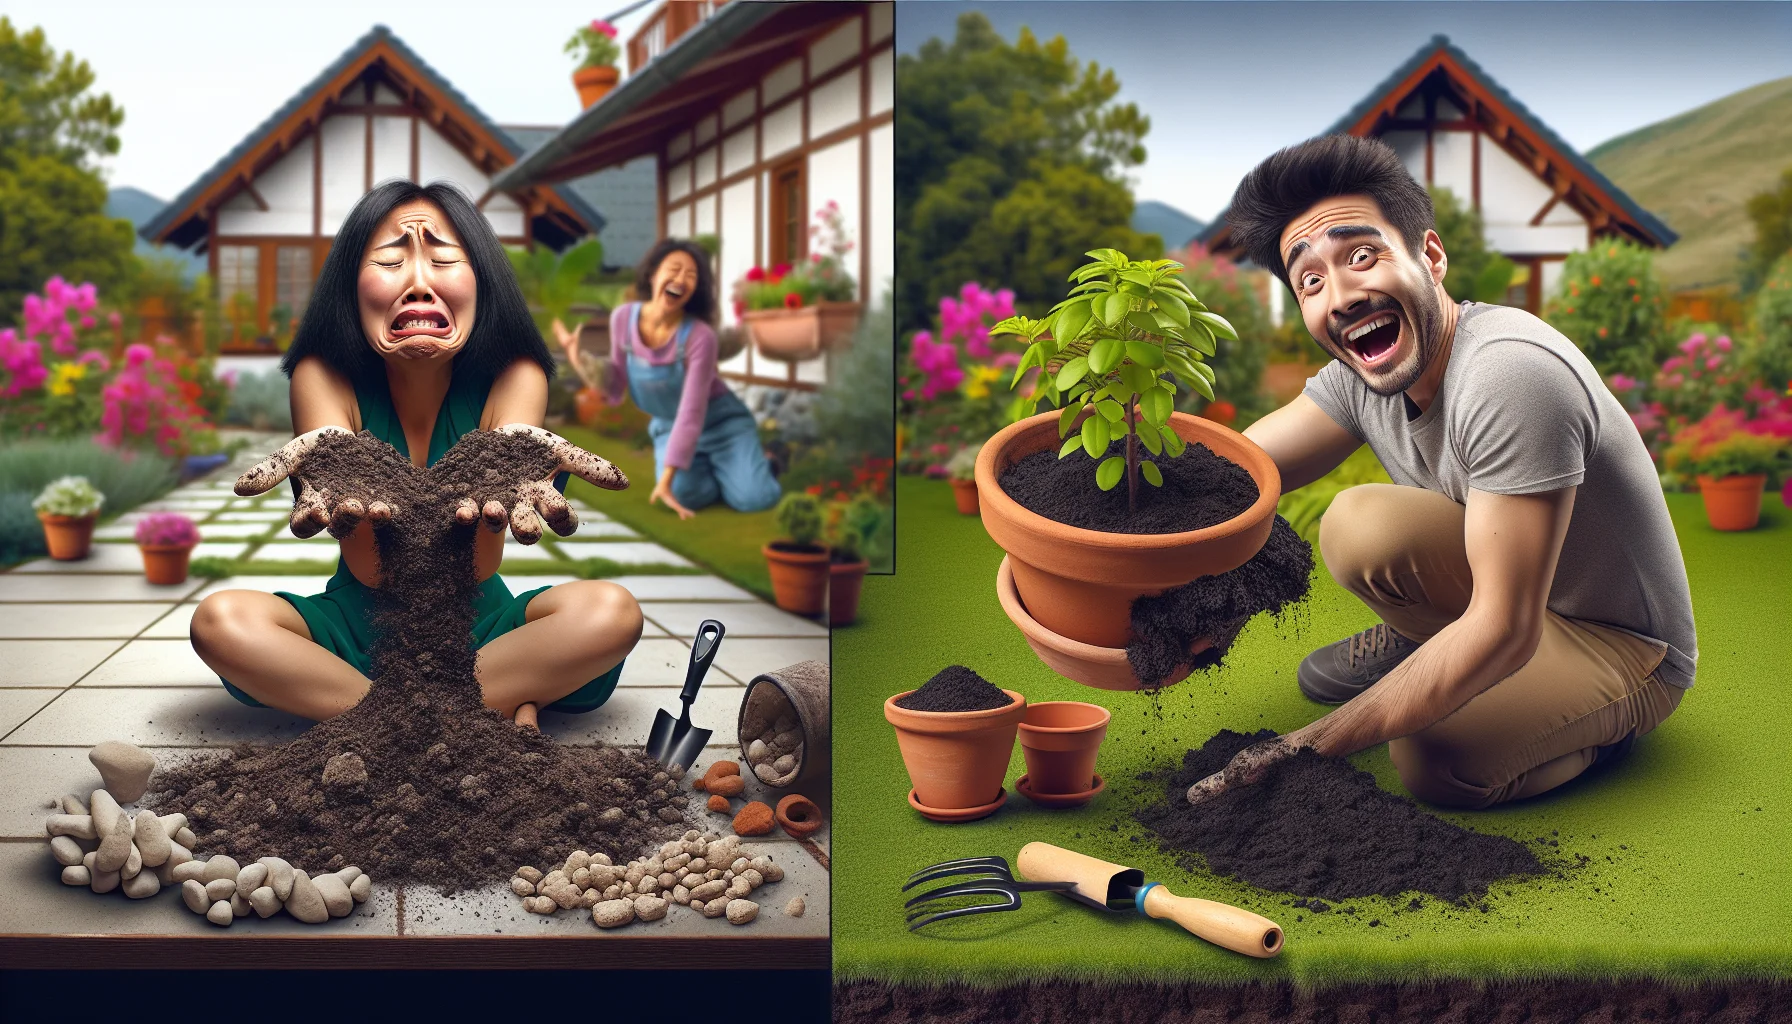 An amusing and enthralling scene showcasing the differences between potting soil and garden soil. On the left, there's a frustrated Asian woman struggling to plant a delicate seedling in a clay pot filled with heavy, chunky garden soil. Highlights of small stones and dense clay can be seen. On the right, there's a joyful Hispanic man easily planting a verdant seedling in another pot filled with light, fluffy potting soil with visible specks of perlite and peat moss. In the background, a vibrant, beautifully maintained garden beckons, reminding viewers of the joys of gardening.